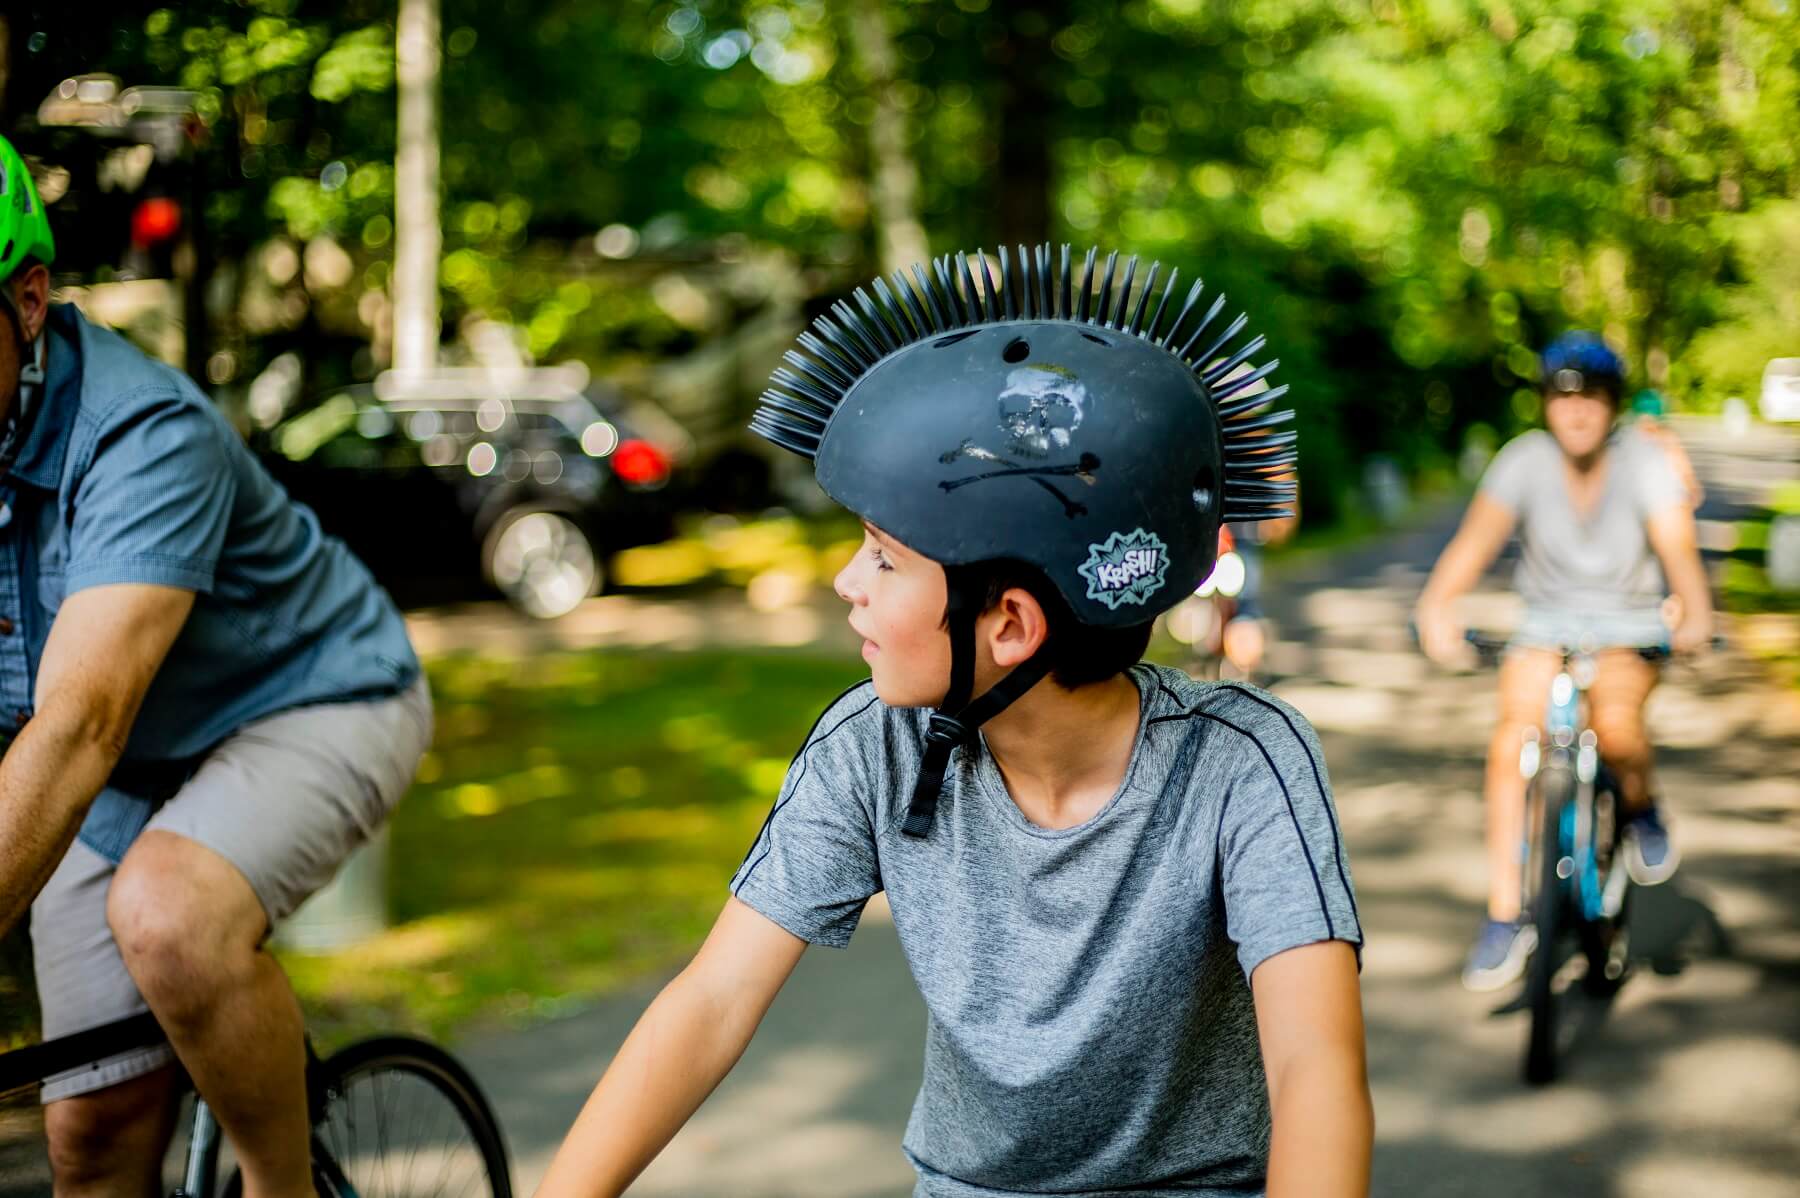 Young boy riding his bike wearing a spiky helmet